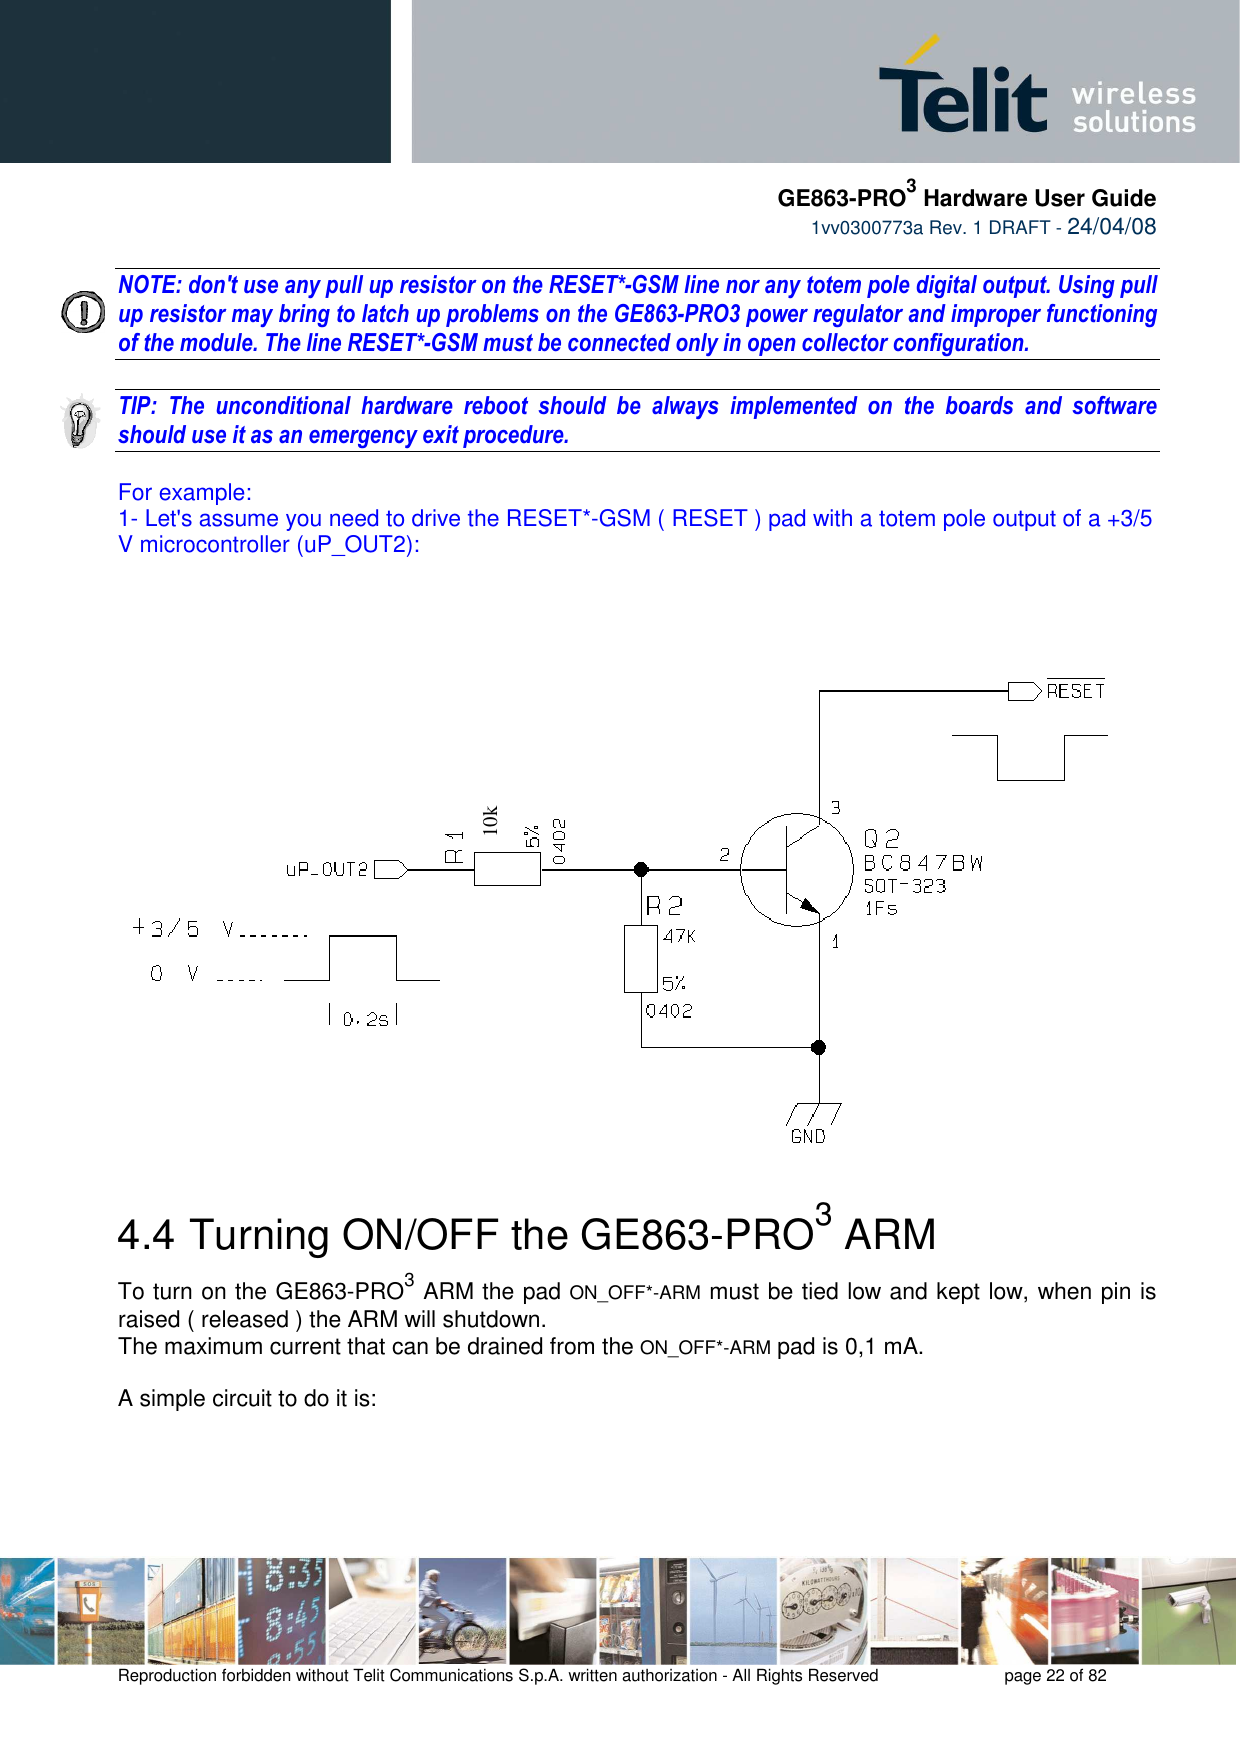     GE863-PRO3 Hardware User Guide  1vv0300773a Rev. 1 DRAFT - 24/04/08    Reproduction forbidden without Telit Communications S.p.A. written authorization - All Rights Reserved    page 22 of 82   NOTE: don&apos;t use any pull up resistor on the RESET*-GSM line nor any totem pole digital output. Using pull up resistor may bring to latch up problems on the GE863-PRO3 power regulator and improper functioning of the module. The line RESET*-GSM must be connected only in open collector configuration.  TIP:  The  unconditional  hardware  reboot  should  be  always  implemented  on  the  boards  and  software should use it as an emergency exit procedure.  For example: 1- Let&apos;s assume you need to drive the RESET*-GSM ( RESET ) pad with a totem pole output of a +3/5 V microcontroller (uP_OUT2):     4.4  Turning ON/OFF the GE863-PRO3 ARM To turn on the GE863-PRO3 ARM the pad ON_OFF*-ARM must be tied low and kept low, when pin is raised ( released ) the ARM will shutdown. The maximum current that can be drained from the ON_OFF*-ARM pad is 0,1 mA.  A simple circuit to do it is:      10k 